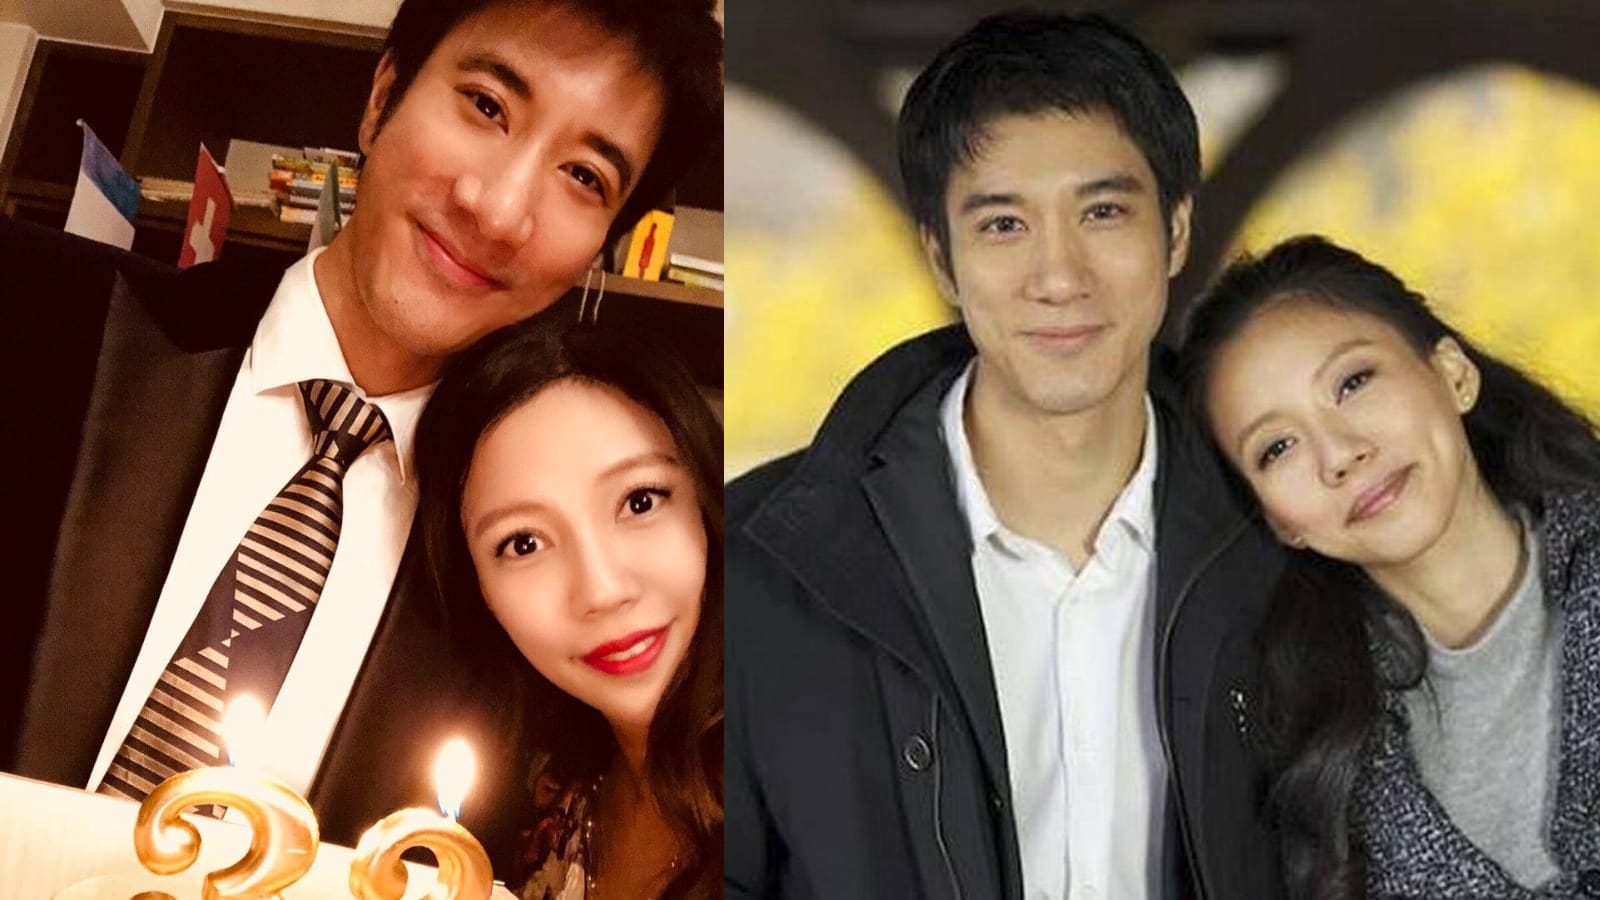 Wang Leehoms Wife Says The Singer Has